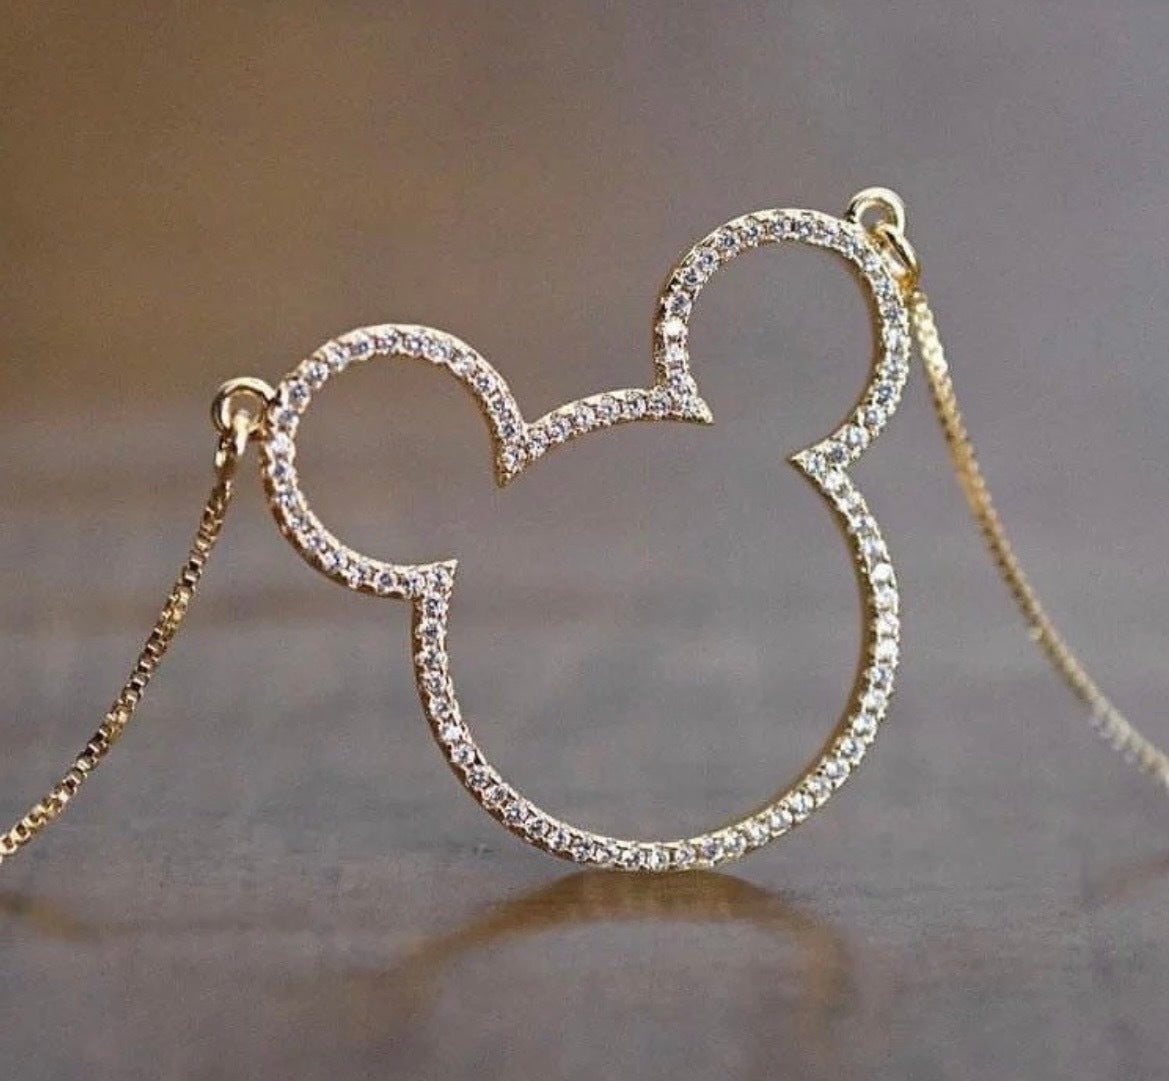 Mouse Head Necklace with Swarovski Crystals